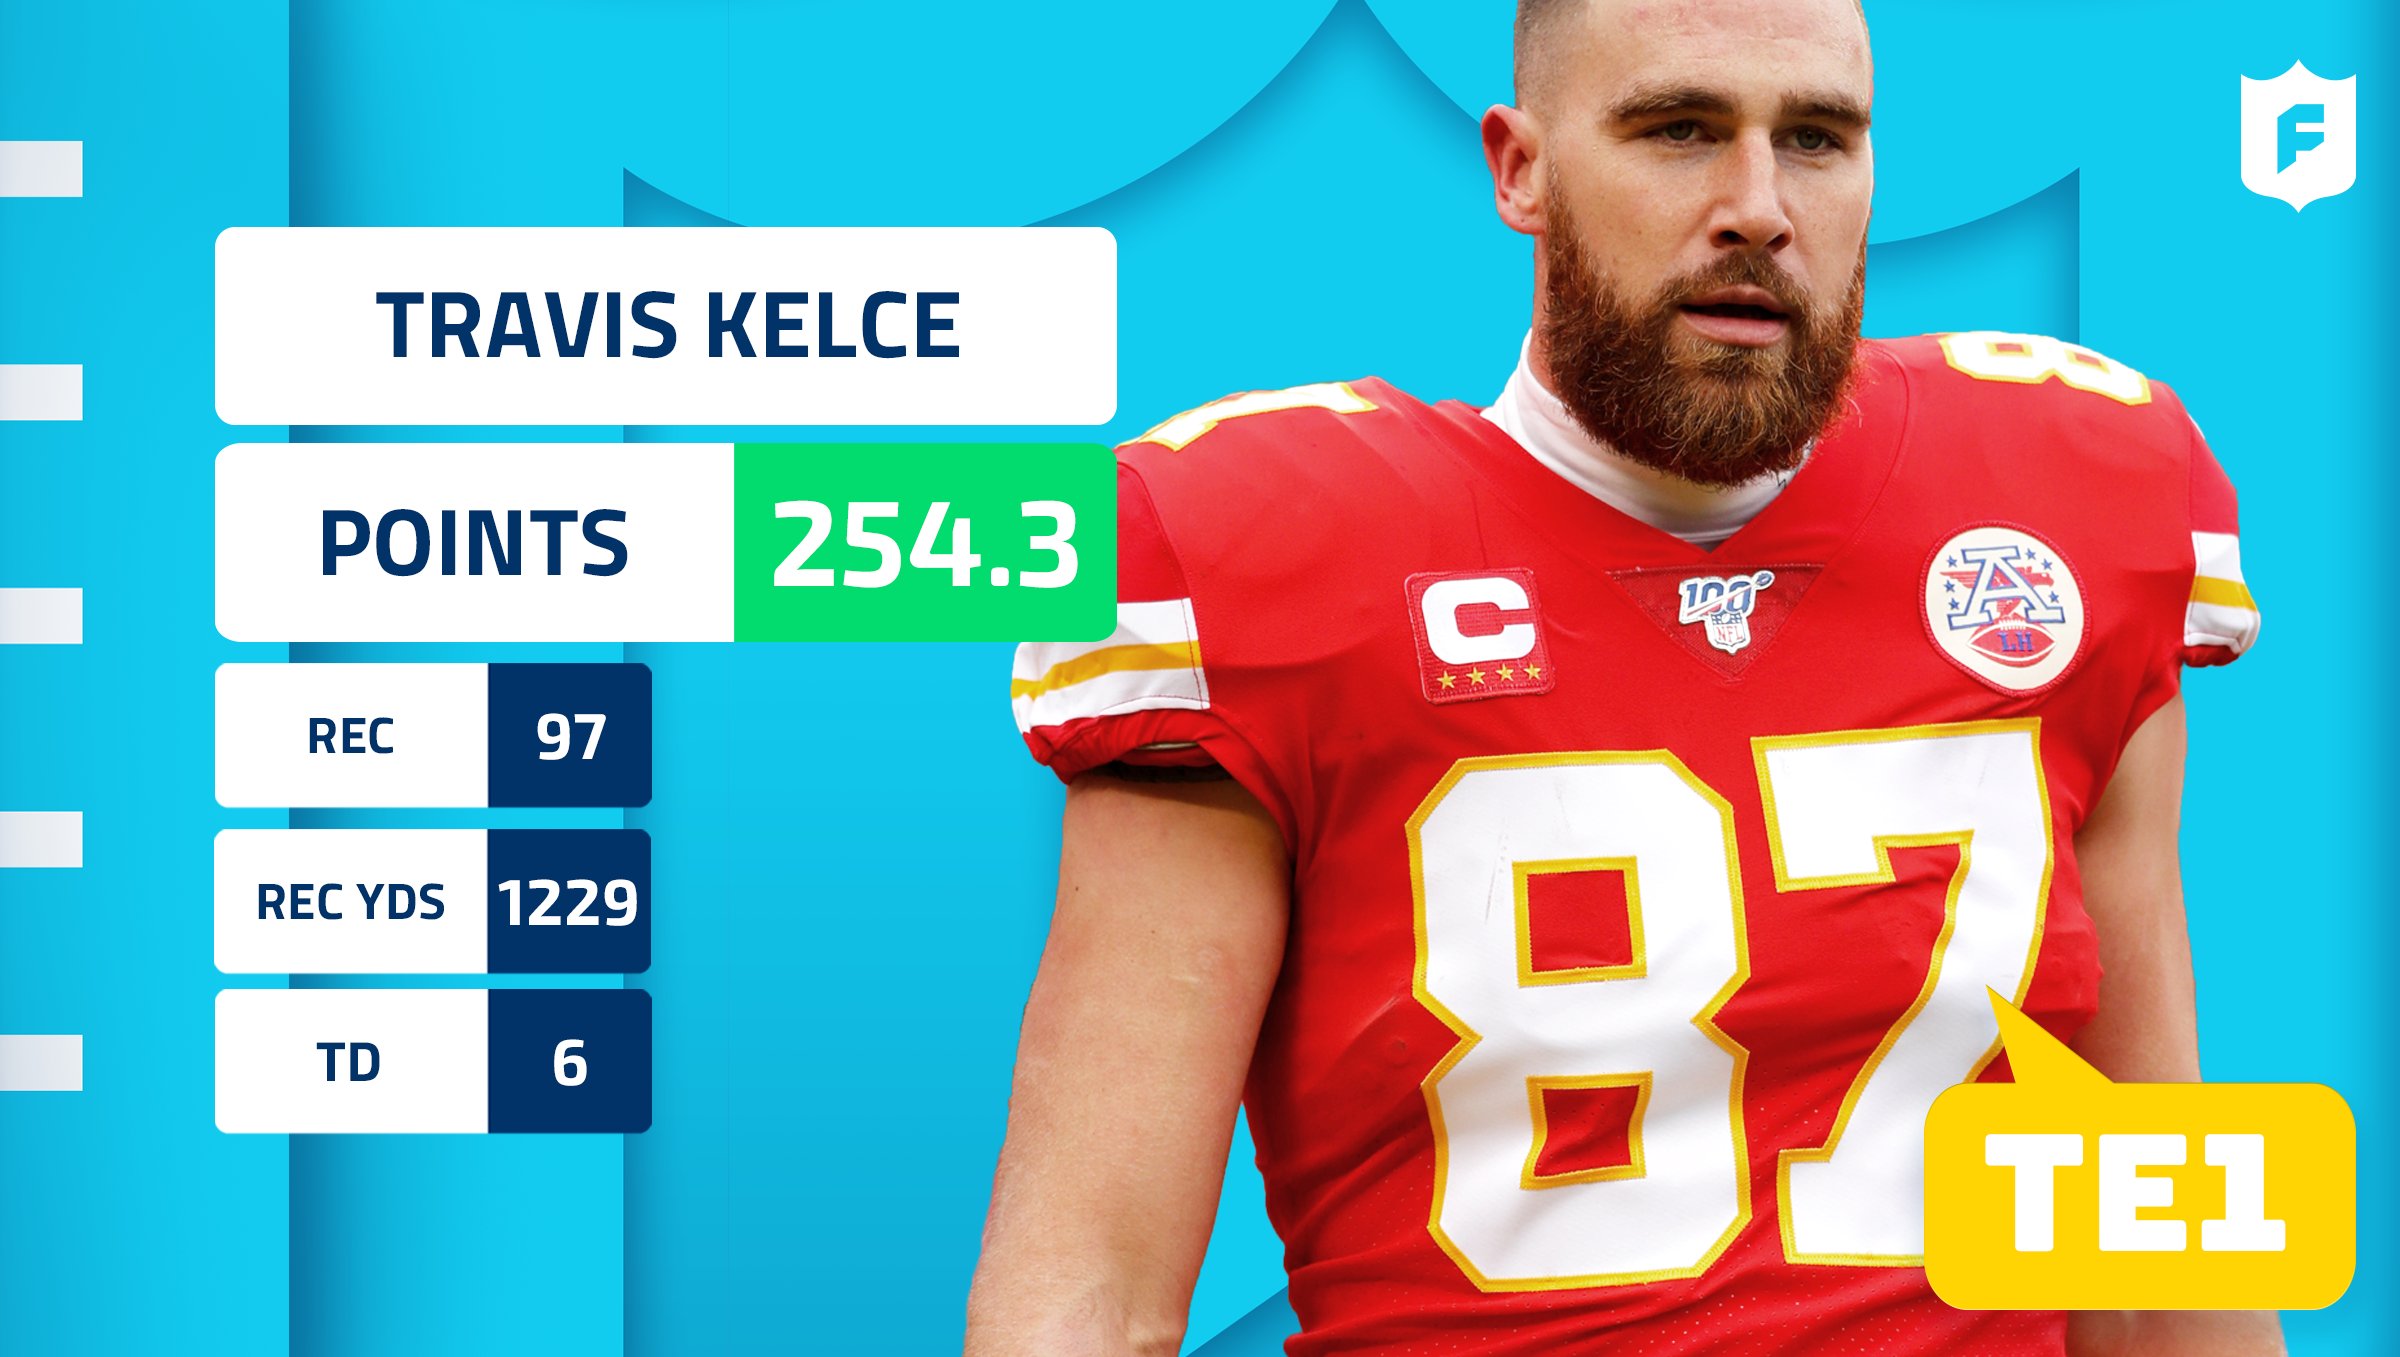 NFL on Twitter "RT NFLFantasy Travis Kelce finished with the most